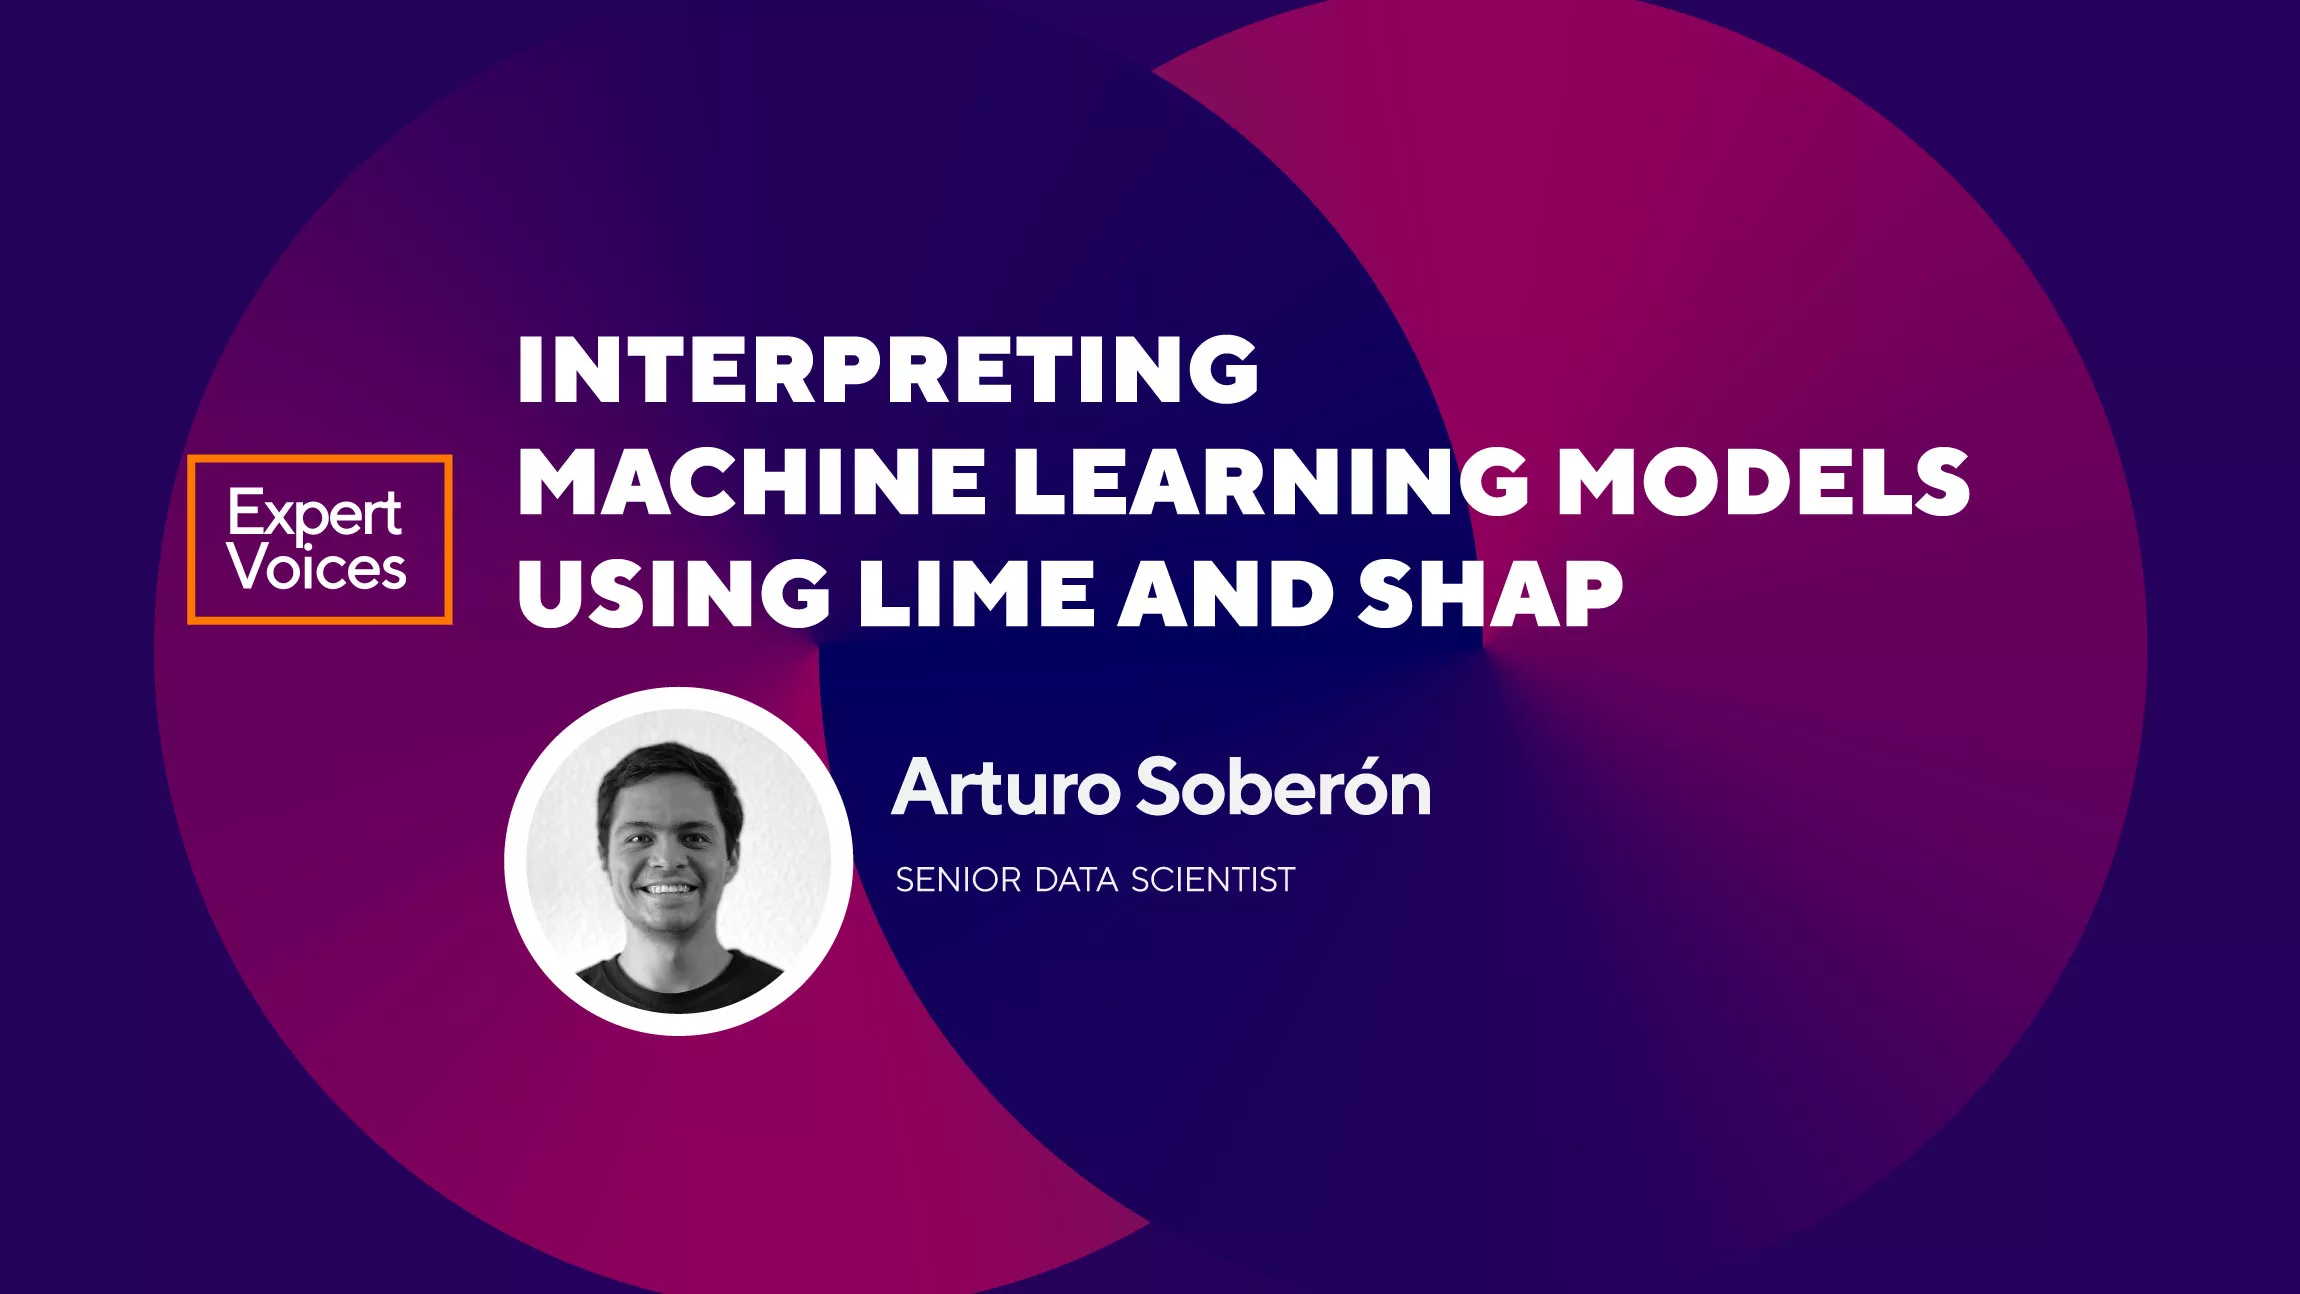 Interpreting Machine Learning Models Using LIME and SHAP